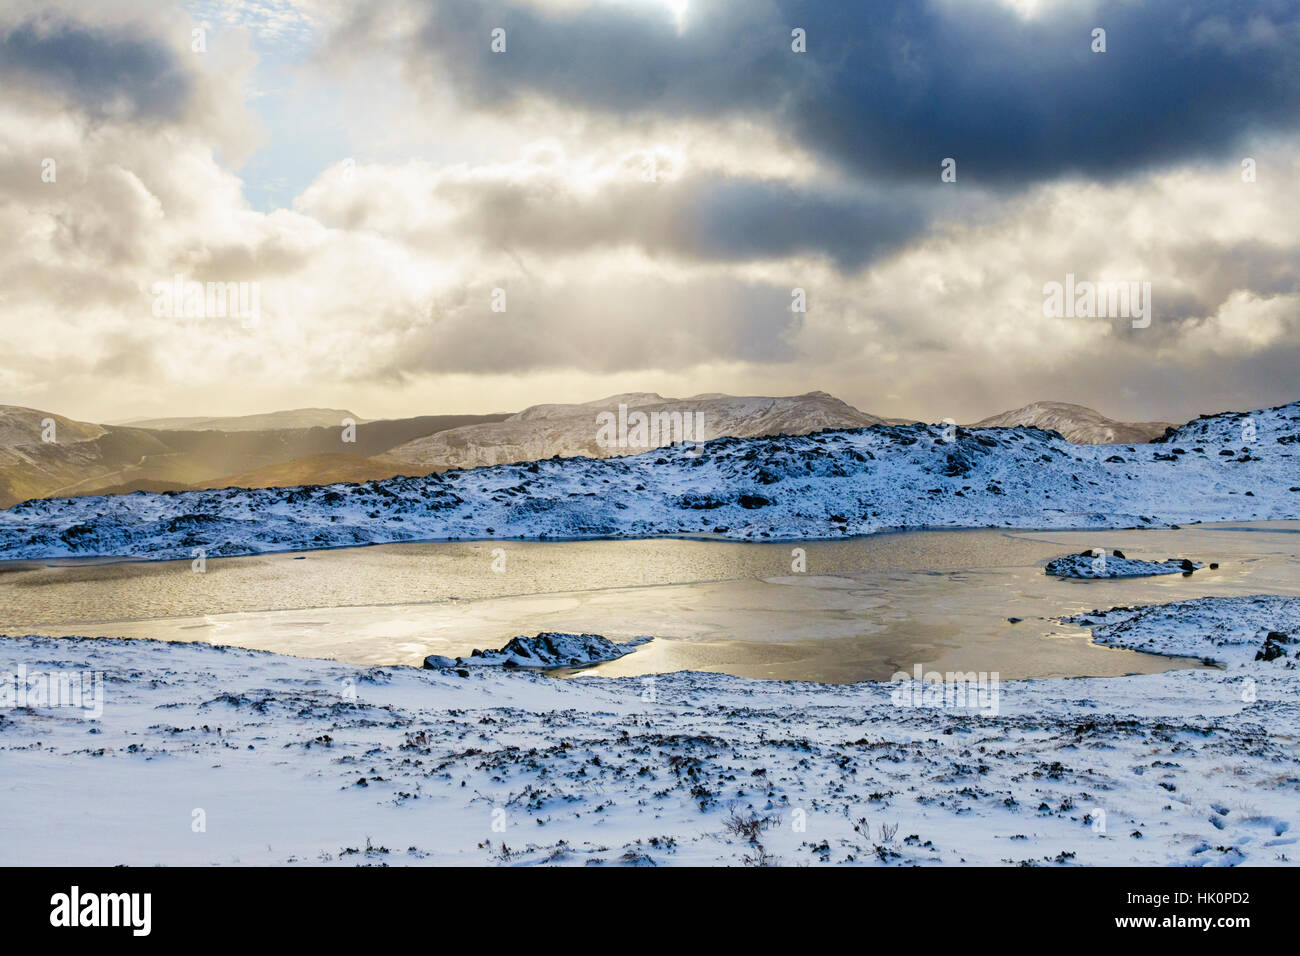 Winter snow scene by Llyn y Foel lake on slopes of Moel Siabod in Snowdonia National Park. Capel Curig, Conwy, Wales, UK, Britain Stock Photo